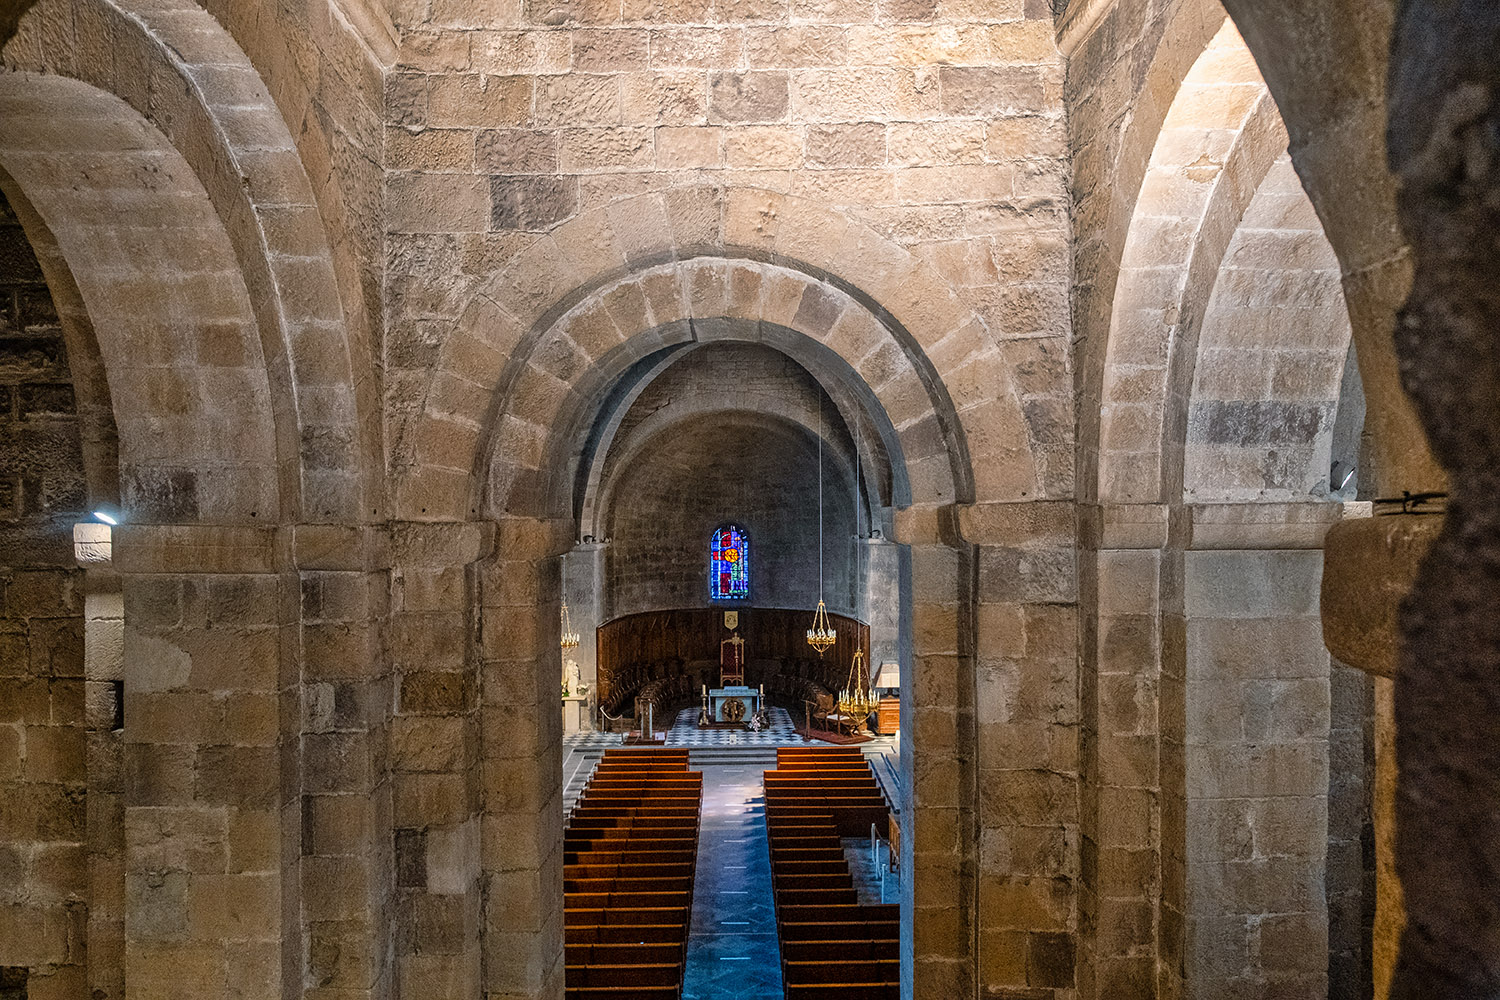 Looking through the narthex into the 'Notre Dame' church